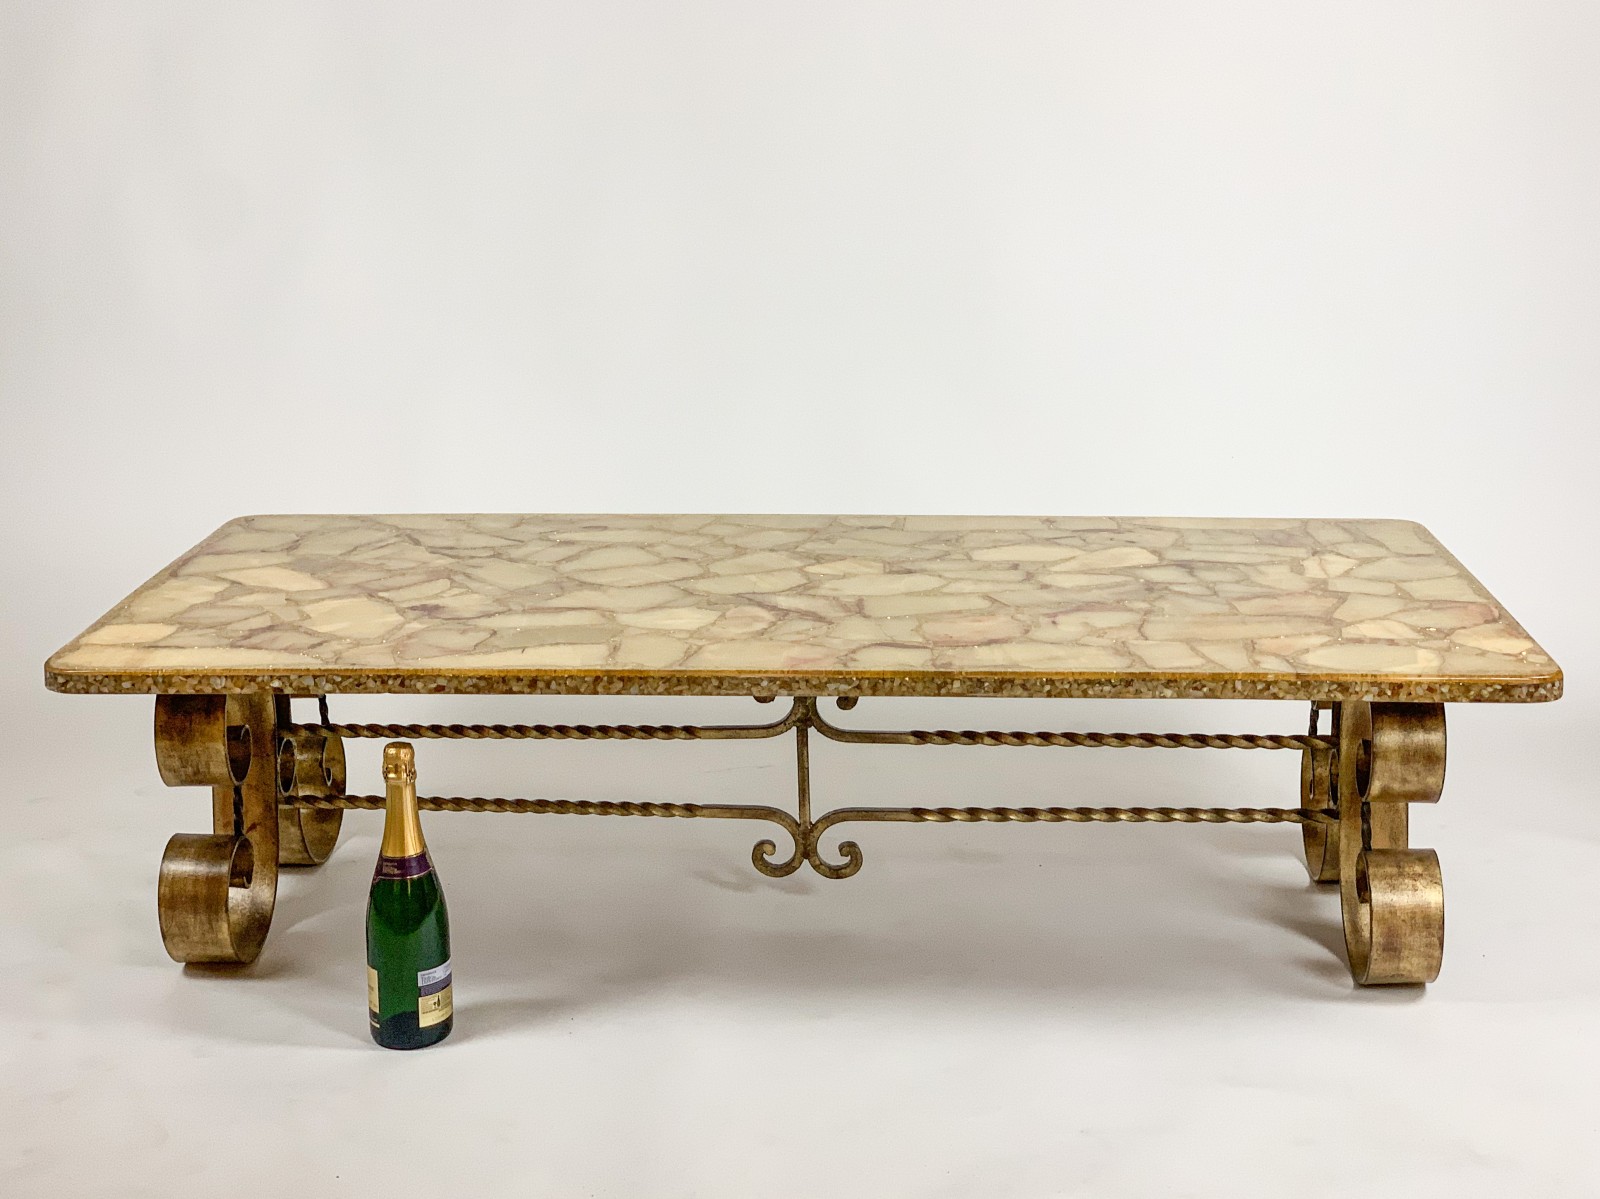 South American Designed Coffee Table With Gilded Wrought Iron Base 